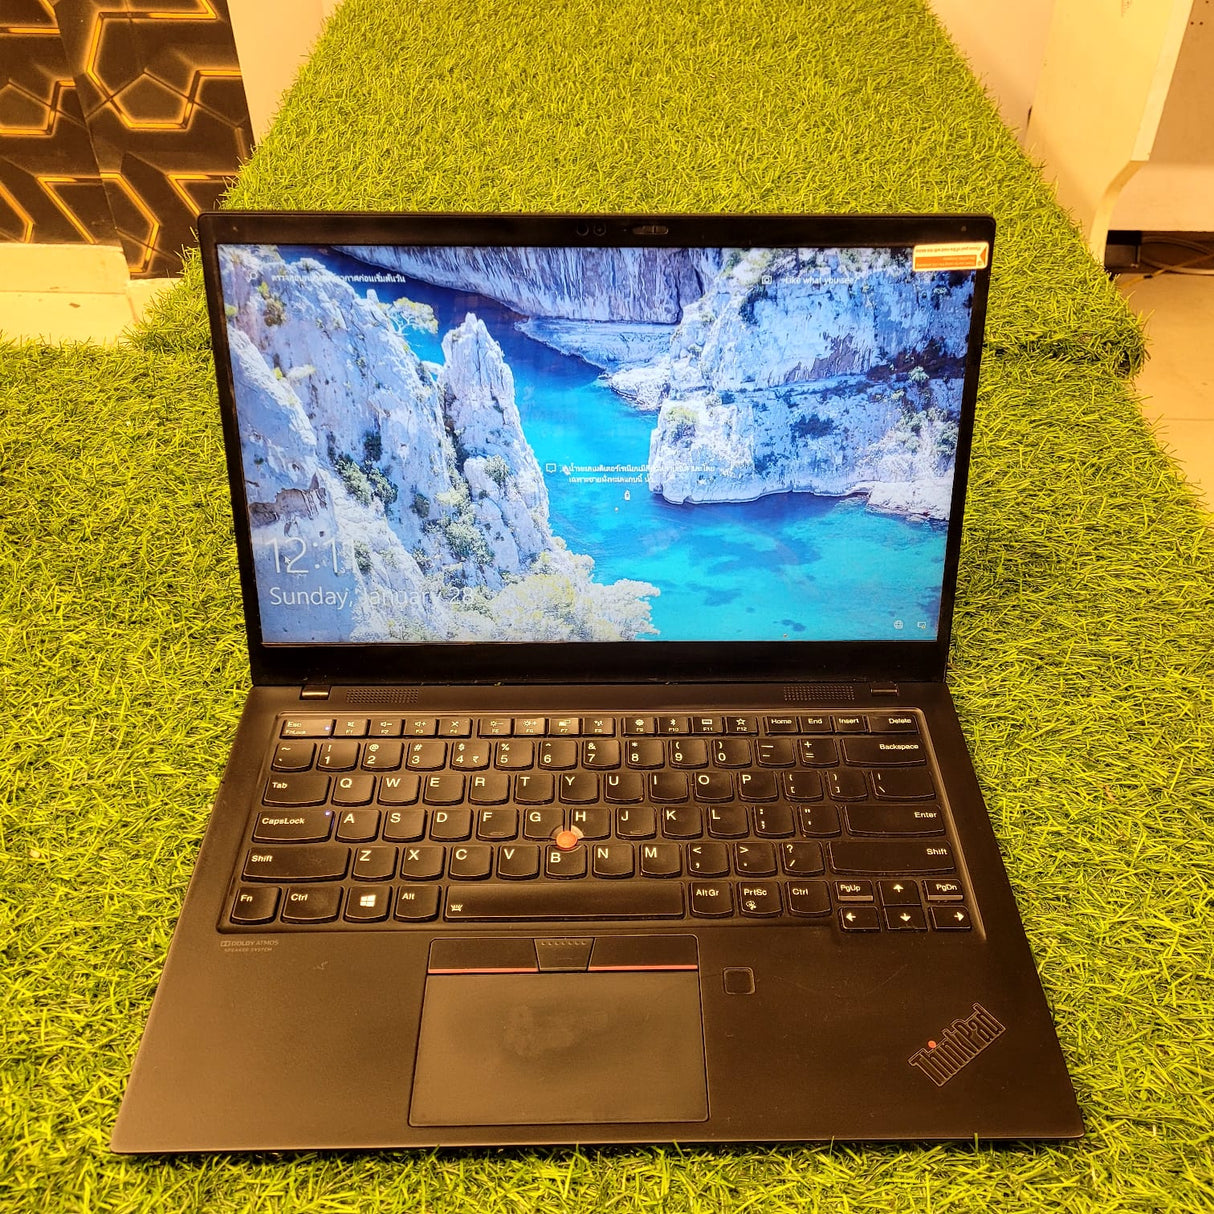 Lenovo ThinKPad X1 Carbon 7th Intel Core i7 8th Gen 14" FHD Display Laptop With Windows 11 Ms Office 2016 (Renewed/Import)